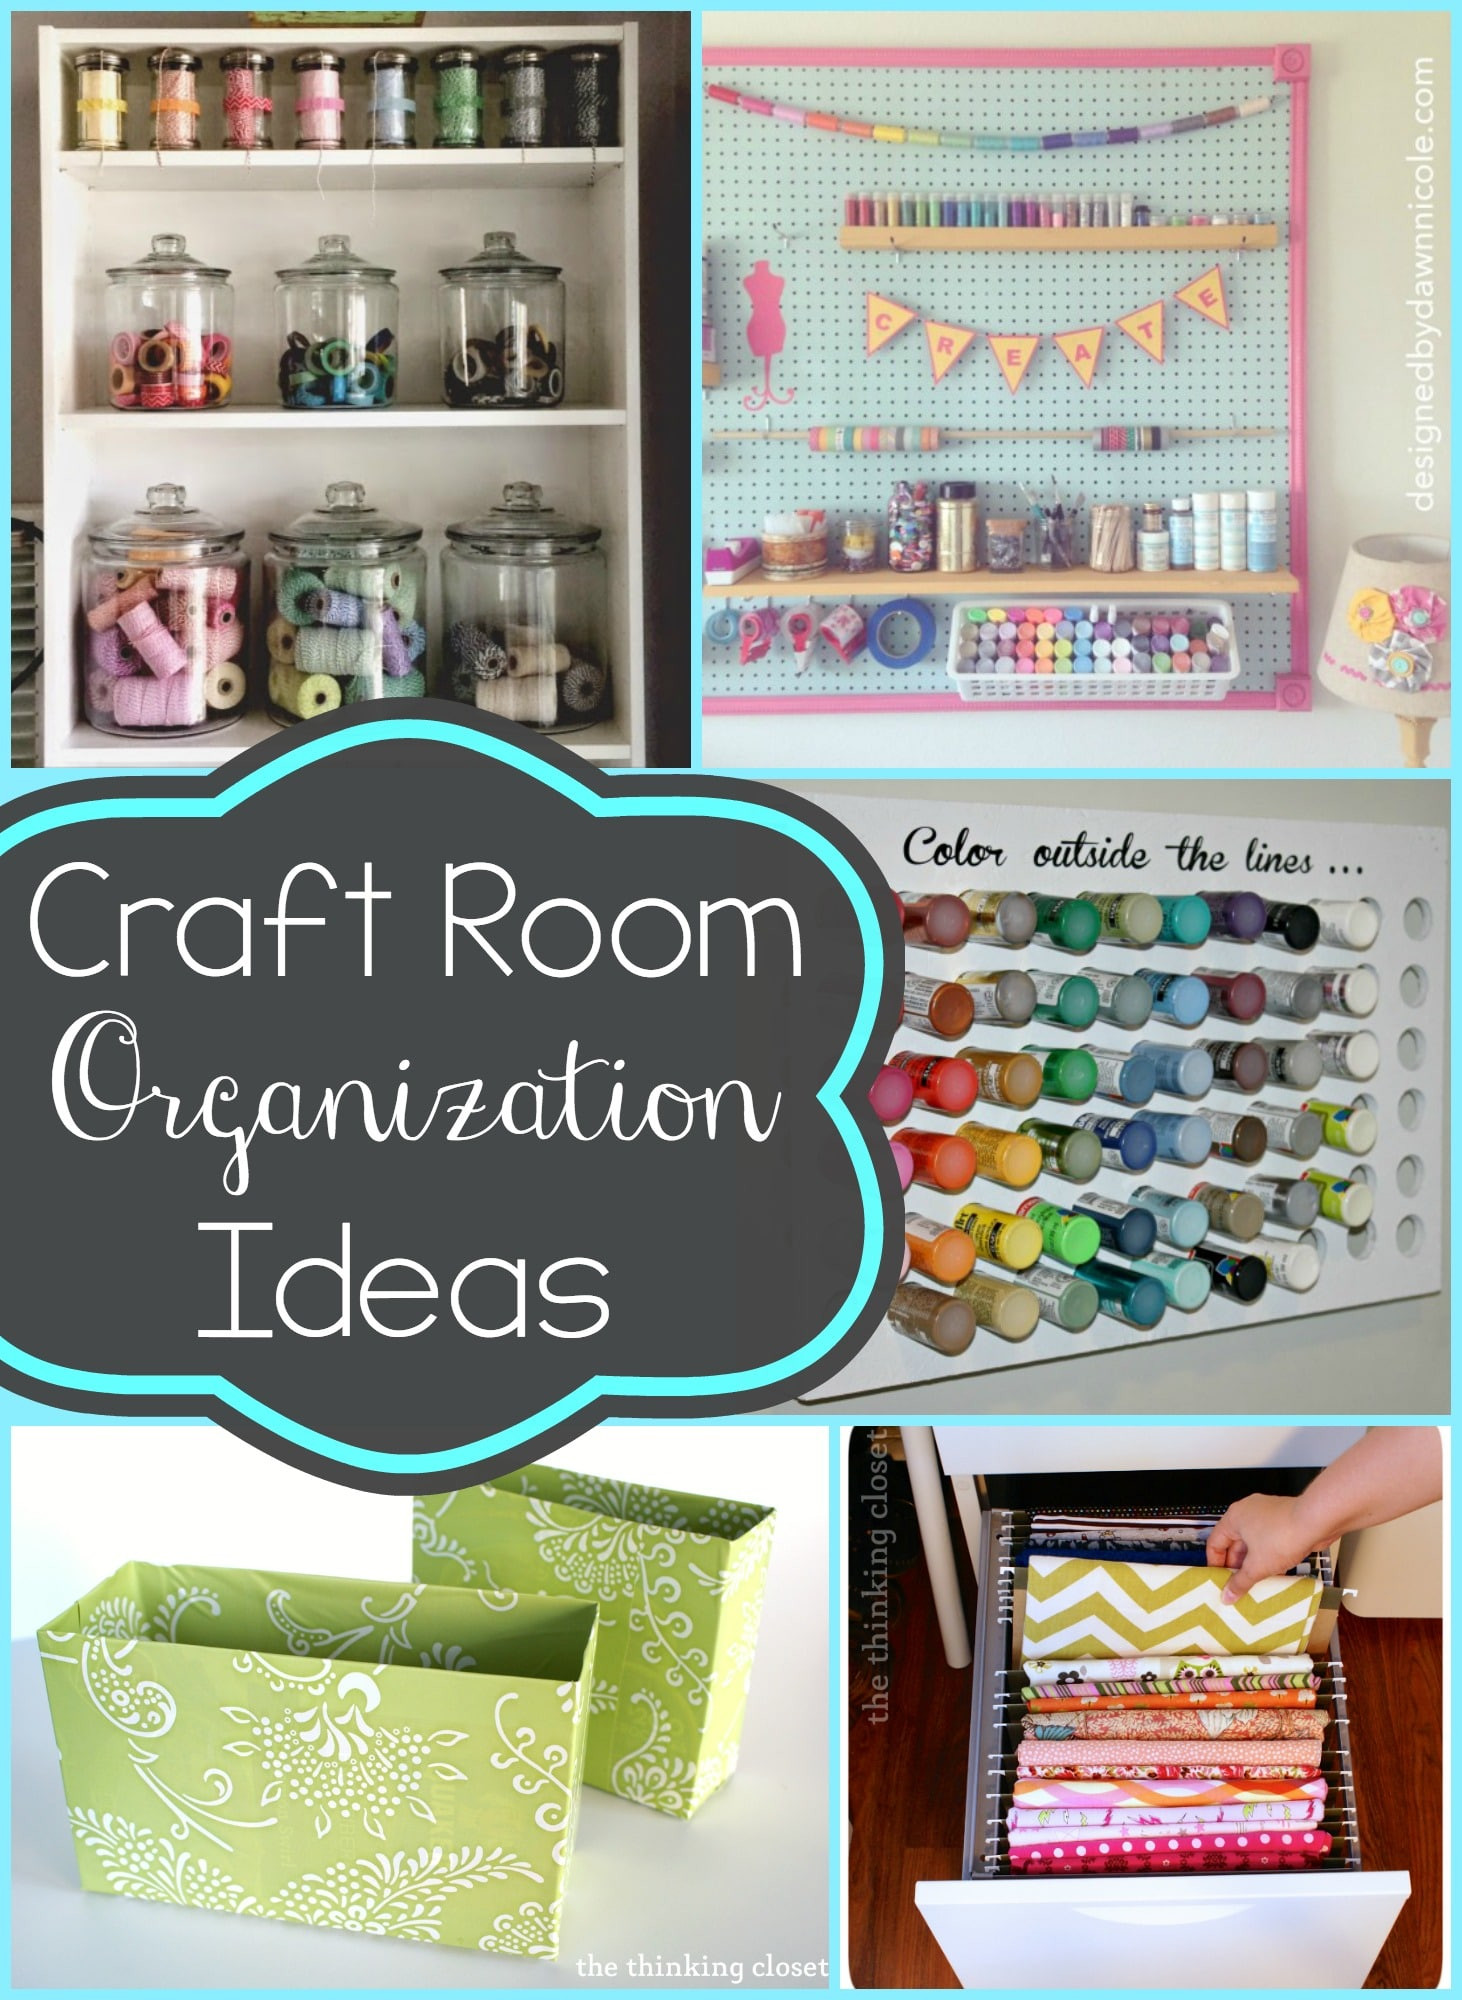 Organization Ideas For Craft Room
 Ideas for Organizing Your Craft Room Typically Simple